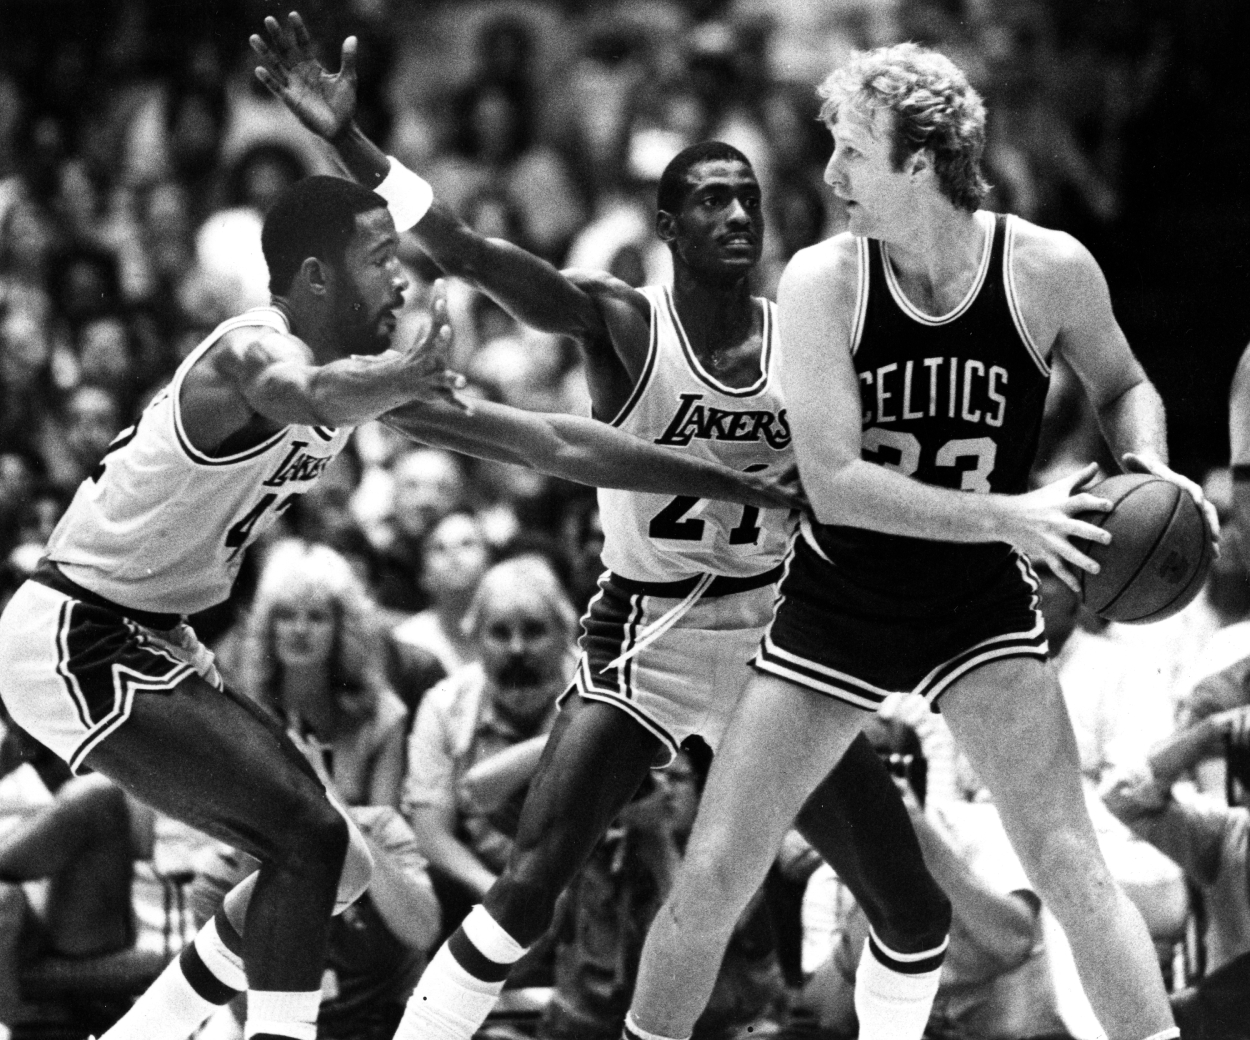 Boston Celtics' Larry Bird is guarded by the Lakers' James Worthy and Michael Cooper.